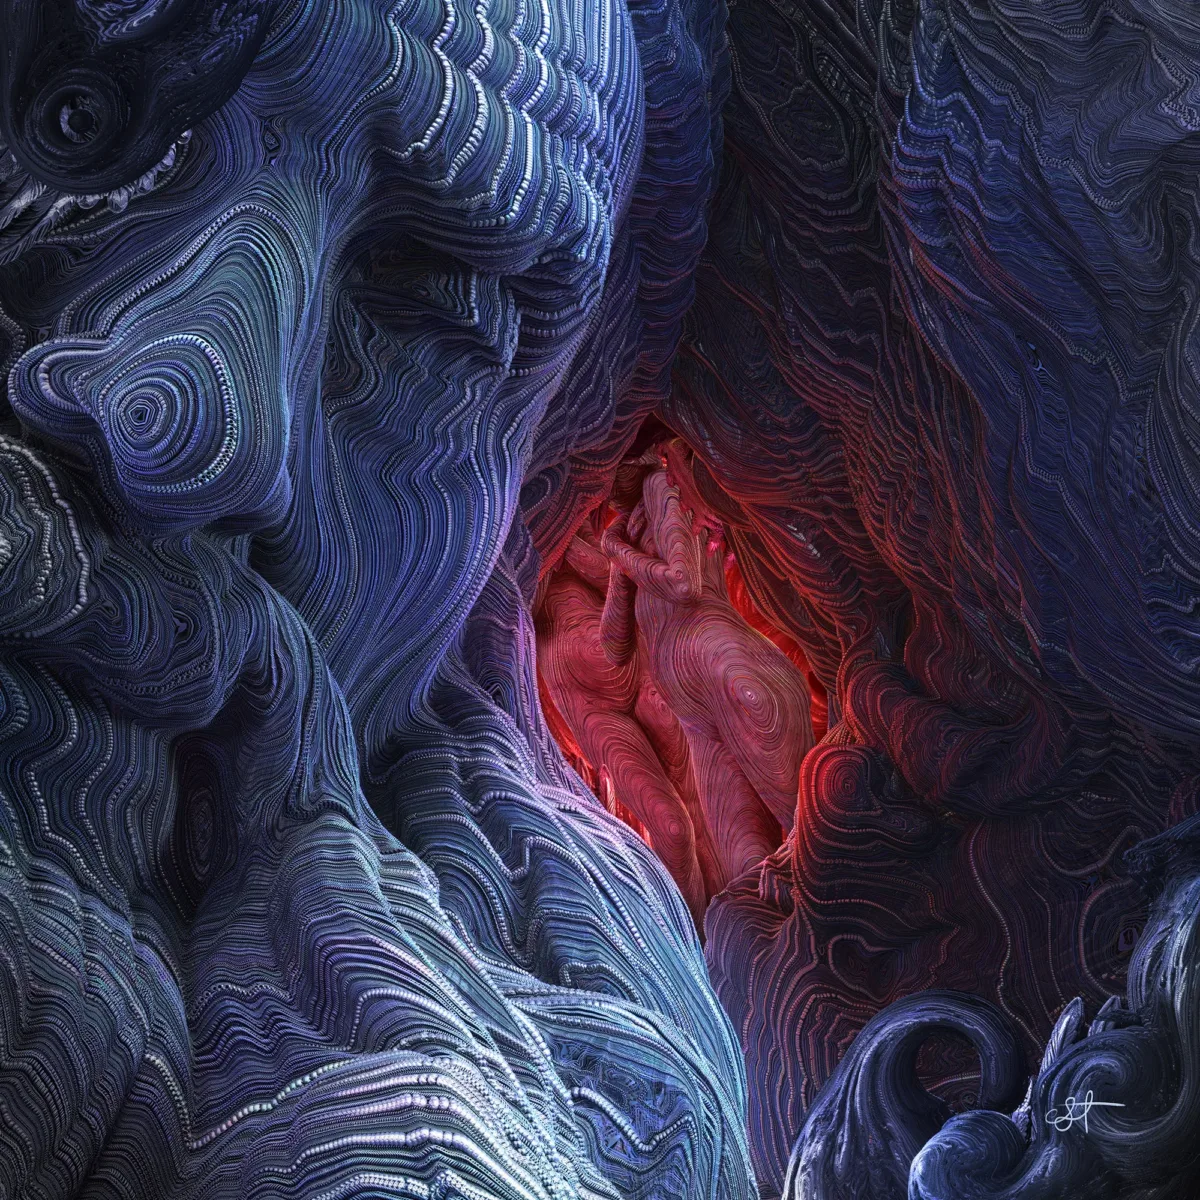 Picture made from waves of chain. The elder in blue tones before beautiful woman's bodies figures in red.